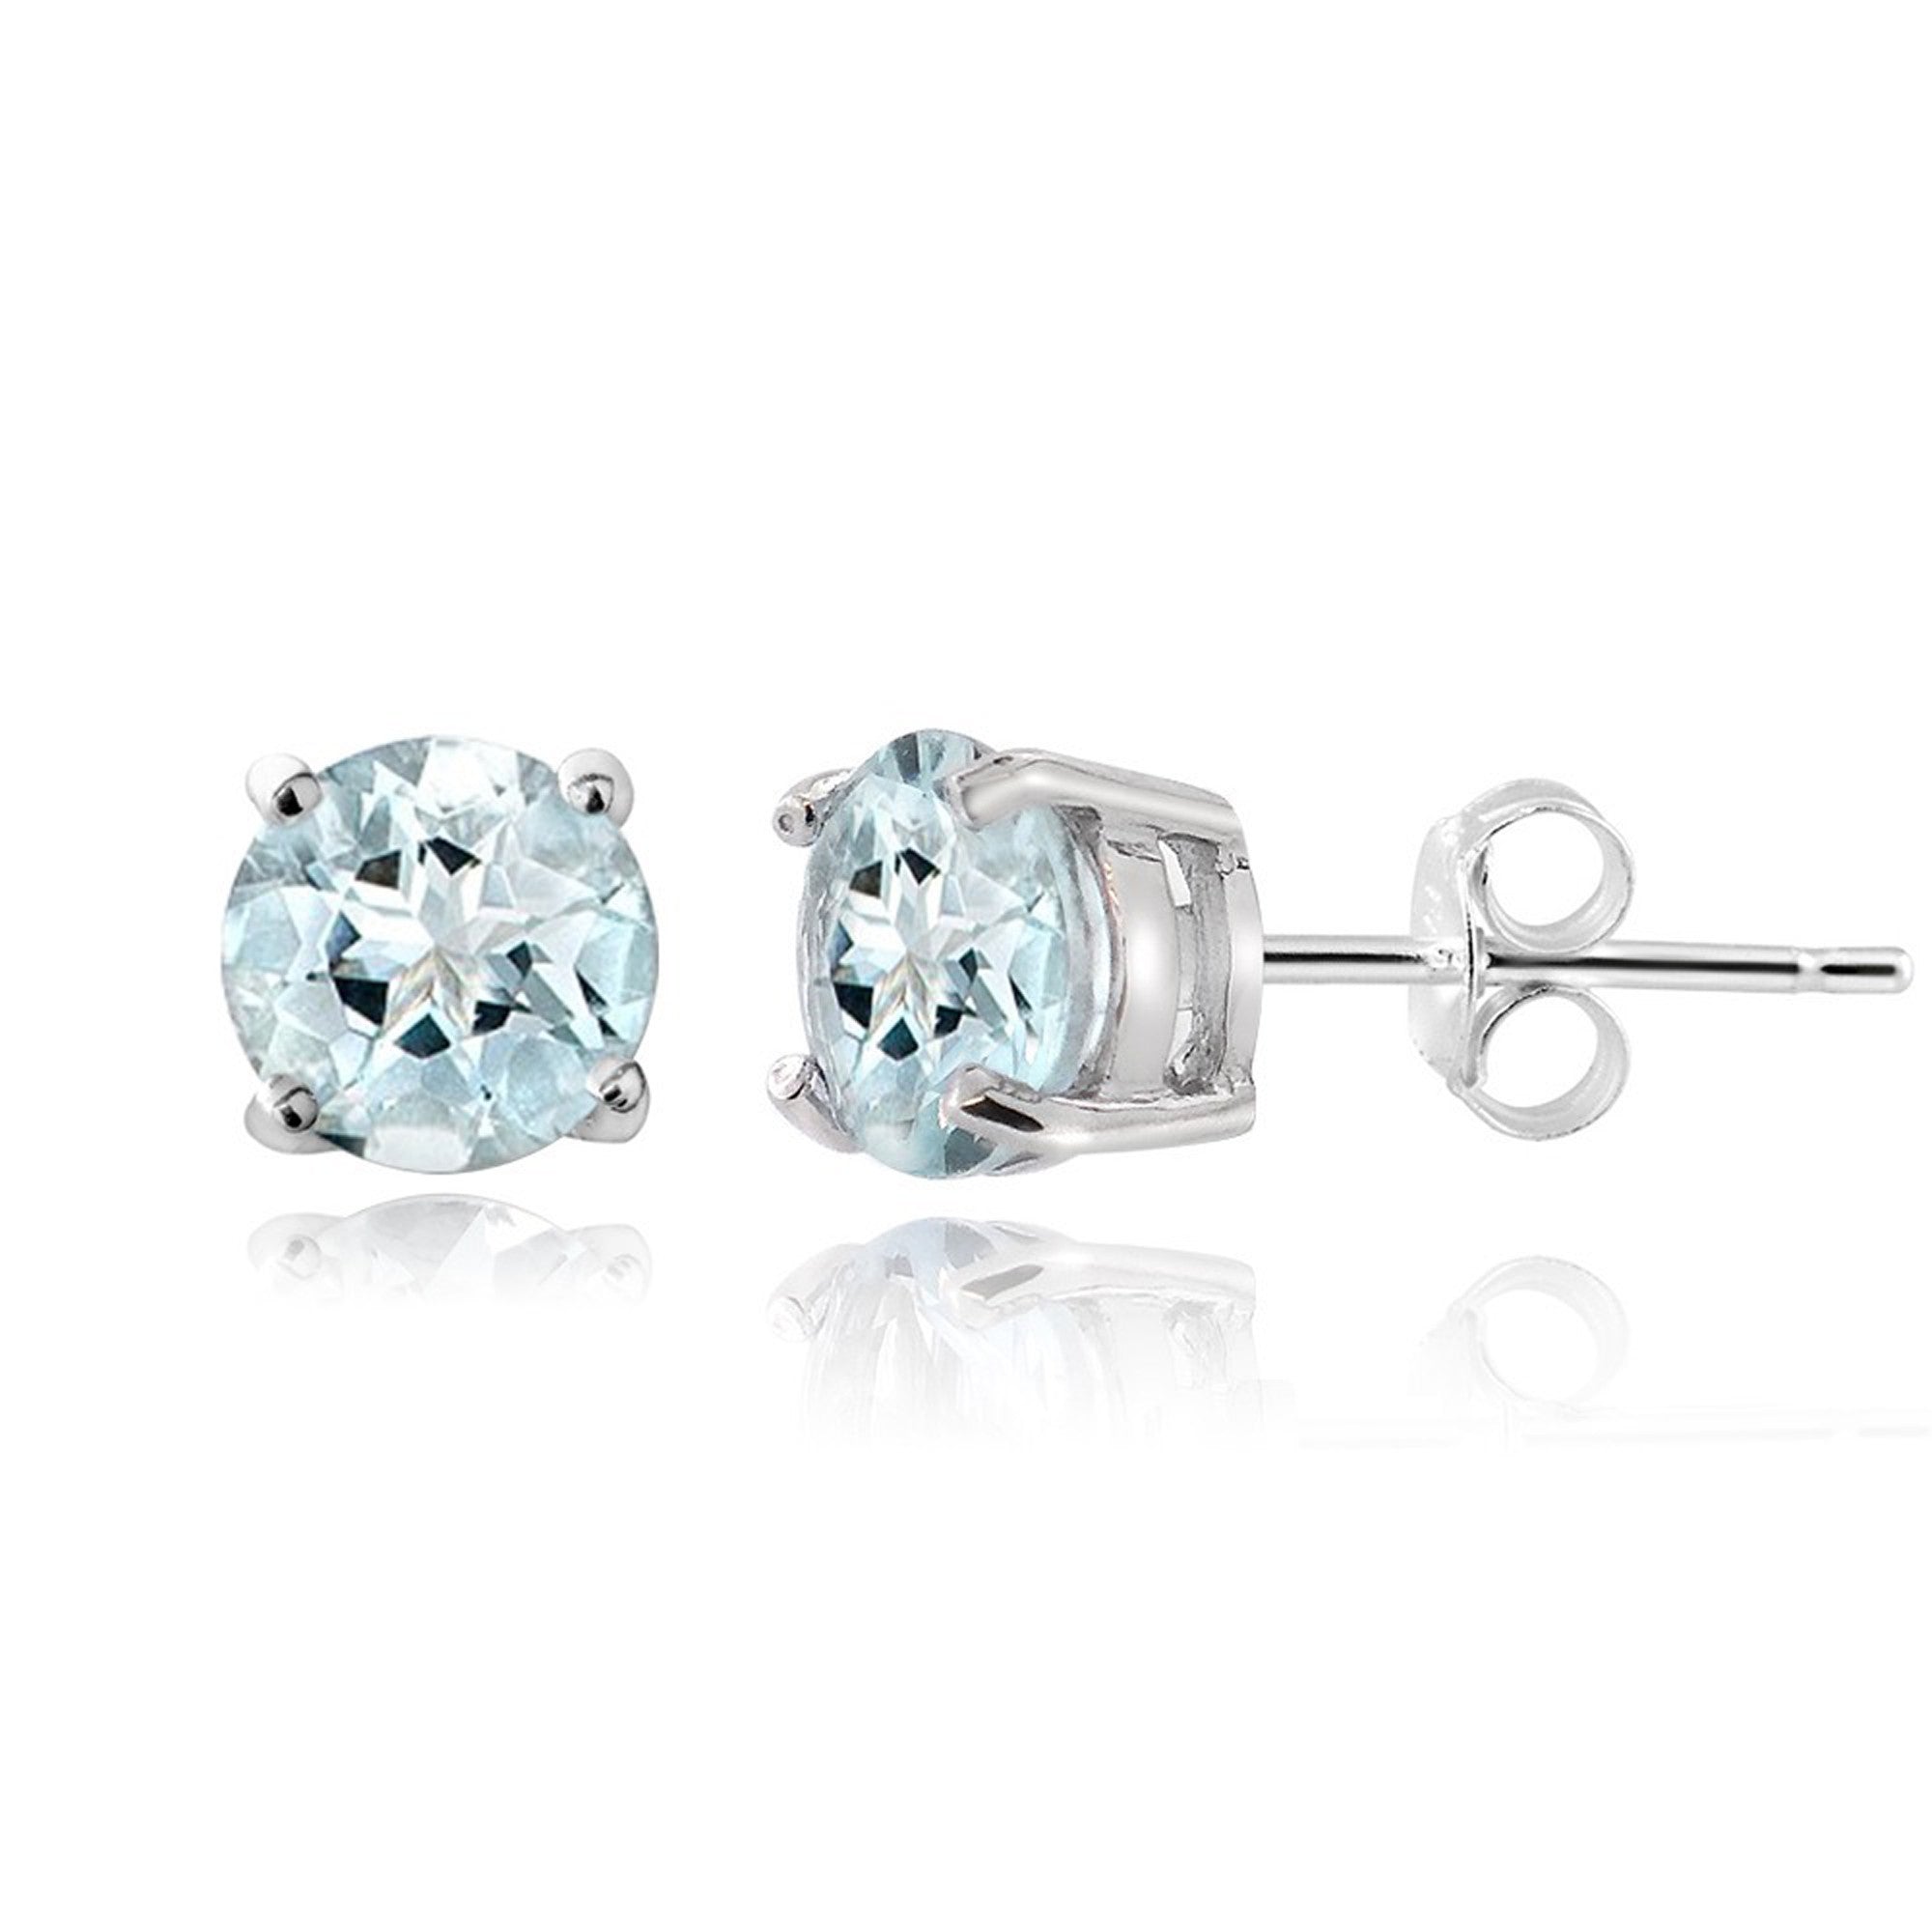 Sterling Silver Gemstone Accent Butterfly Clasp Stud Earrings - Aquamarine